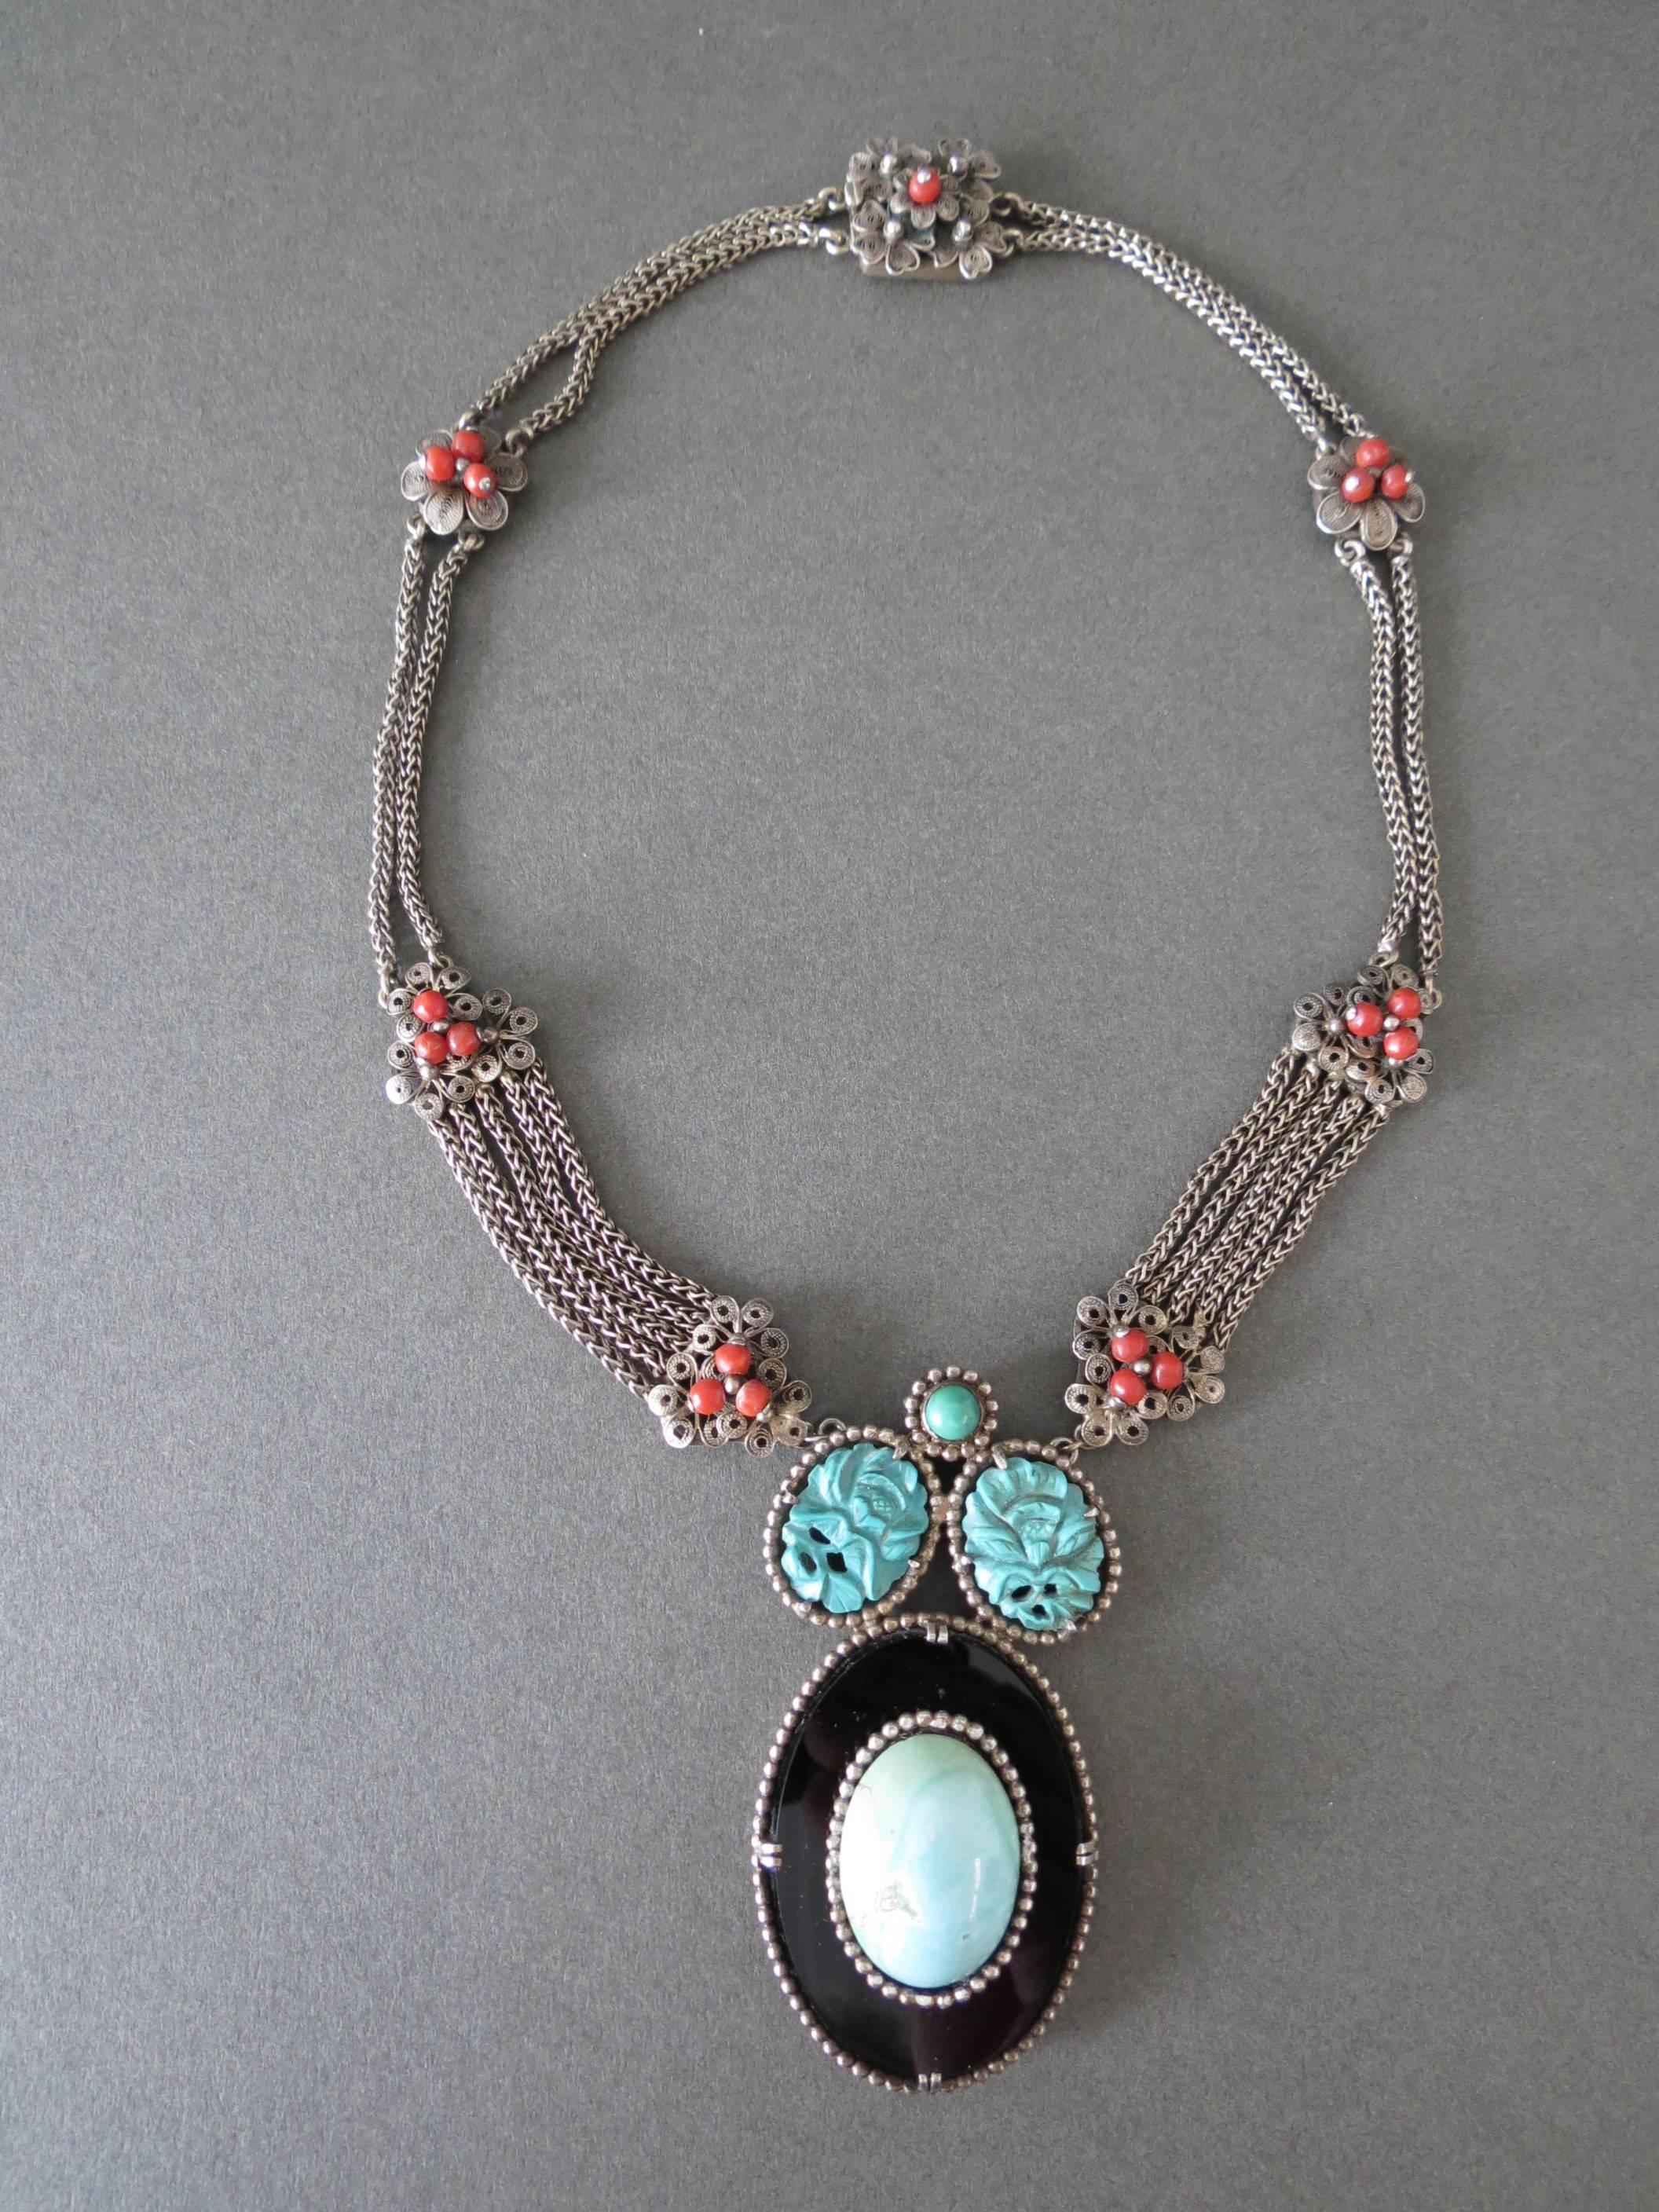 This is lovely greenish carved turquoise , blue turquoise , onyx and coral filigree silver necklace most likely originated in 1920-30's China. Absolutely amazing piece . Not hallmarked but tested .
Item Specifics
Full length: 47cm (approx